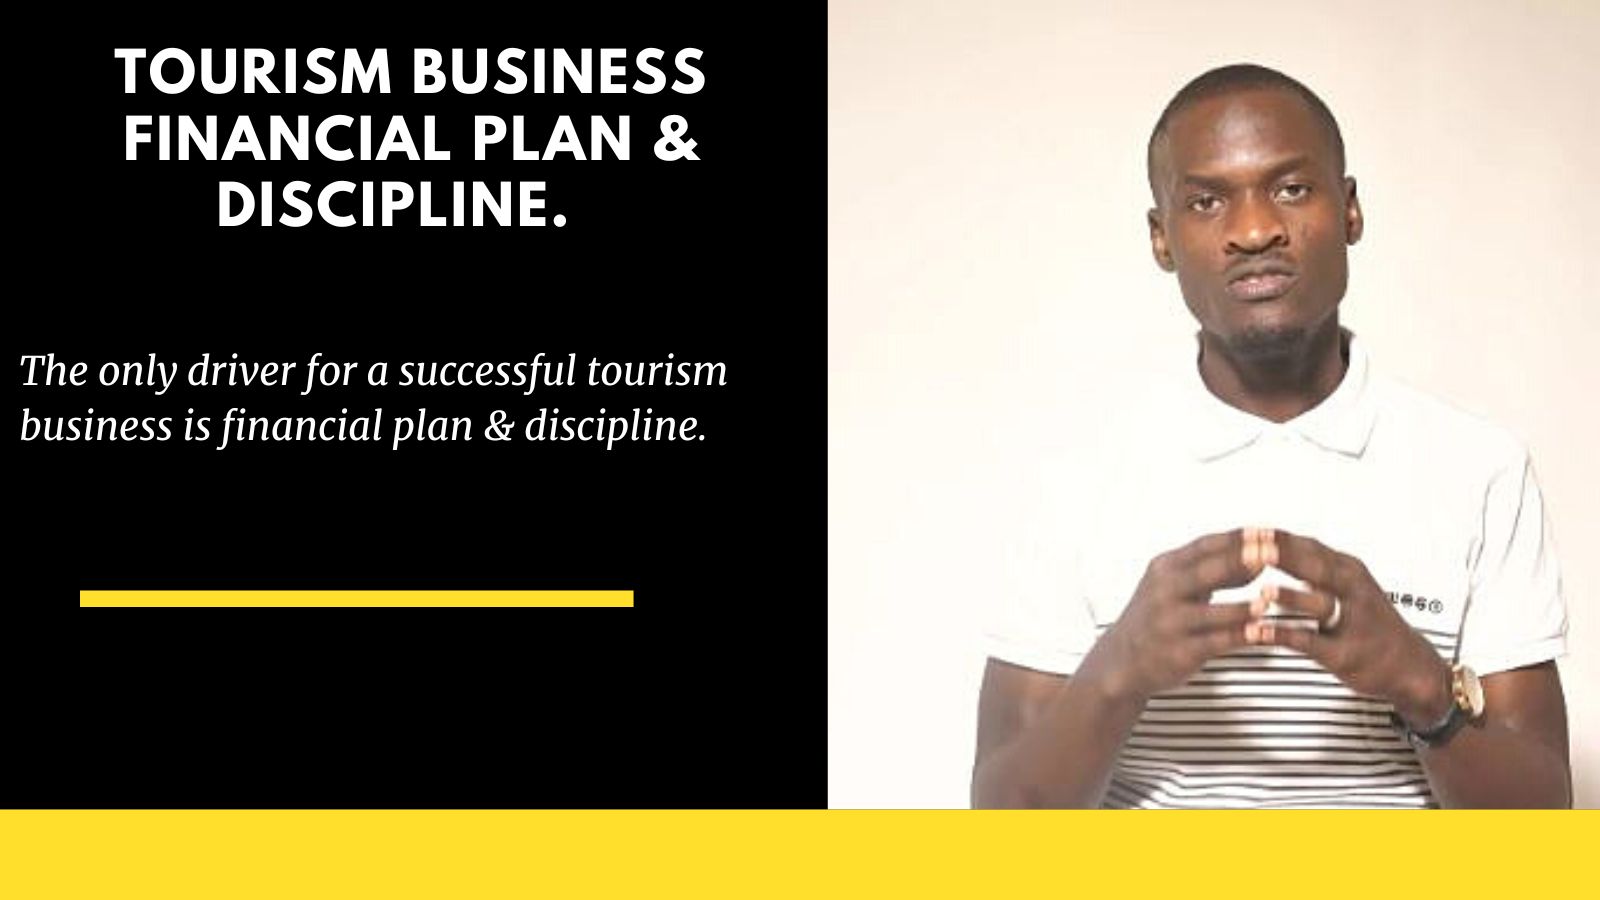 Financial Plan For Your Tourism Business